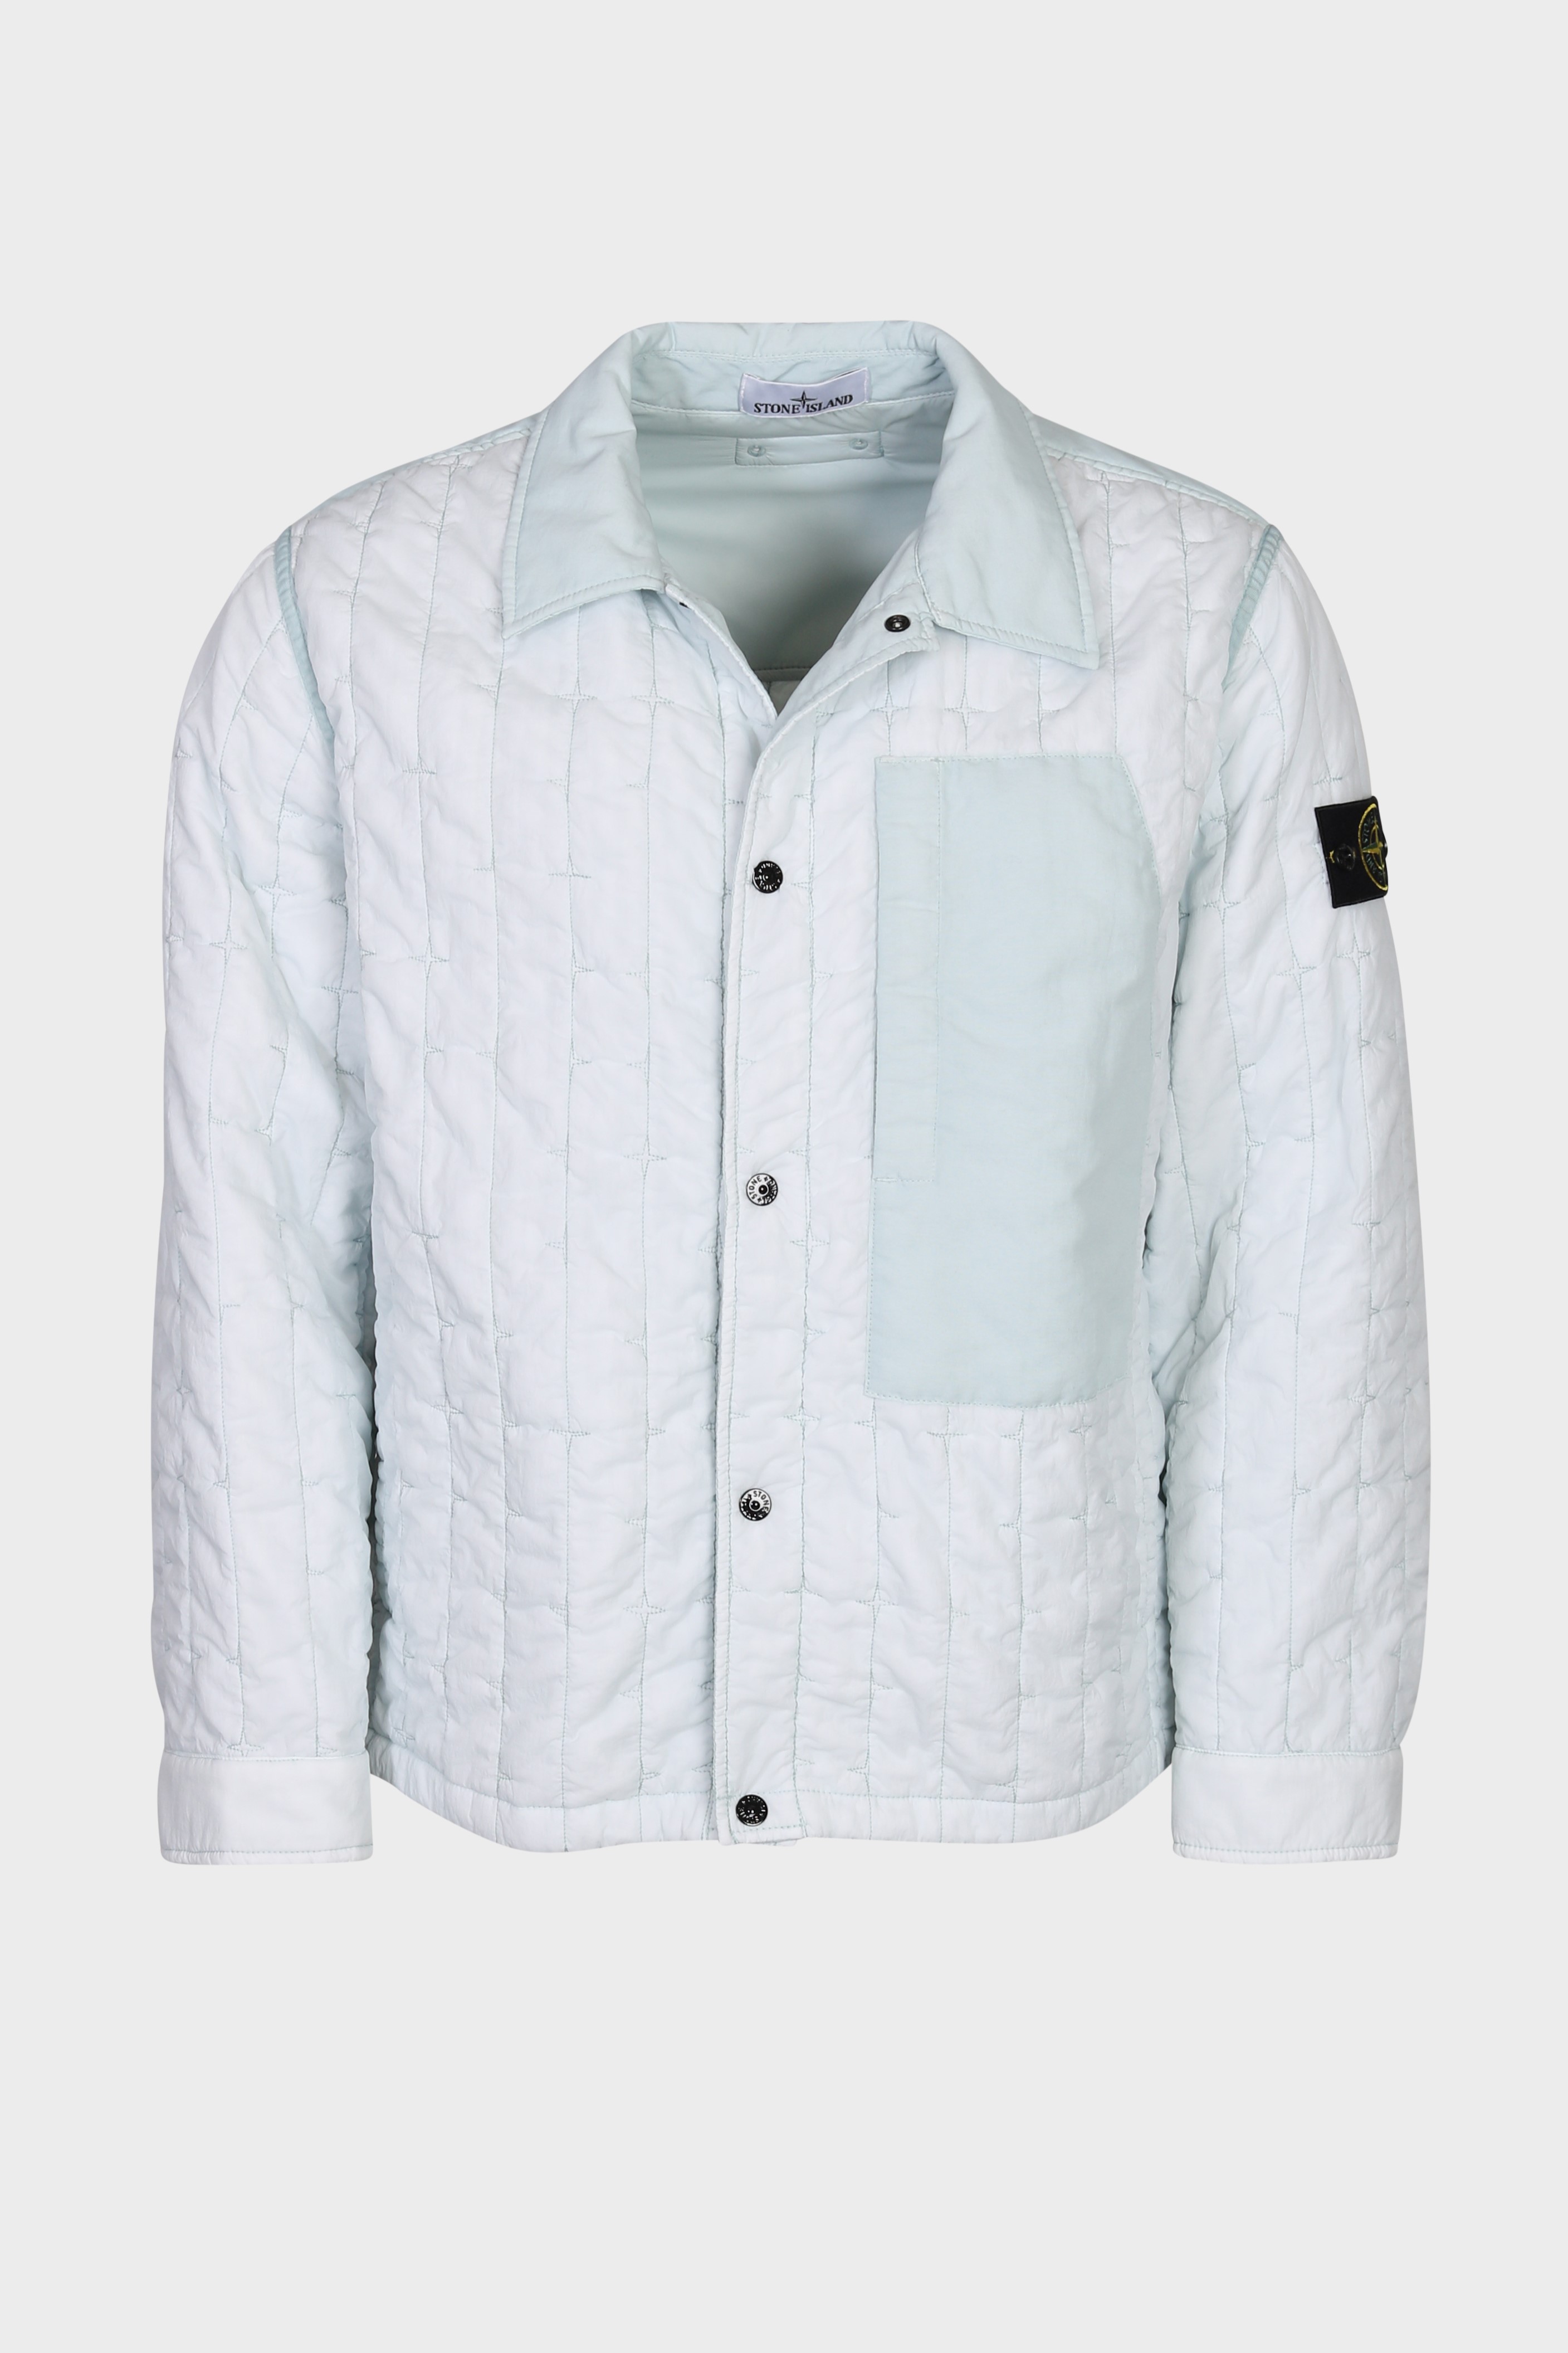 STONE ISLAND Quilted Nylon Stella Jacket in Sky Blue L